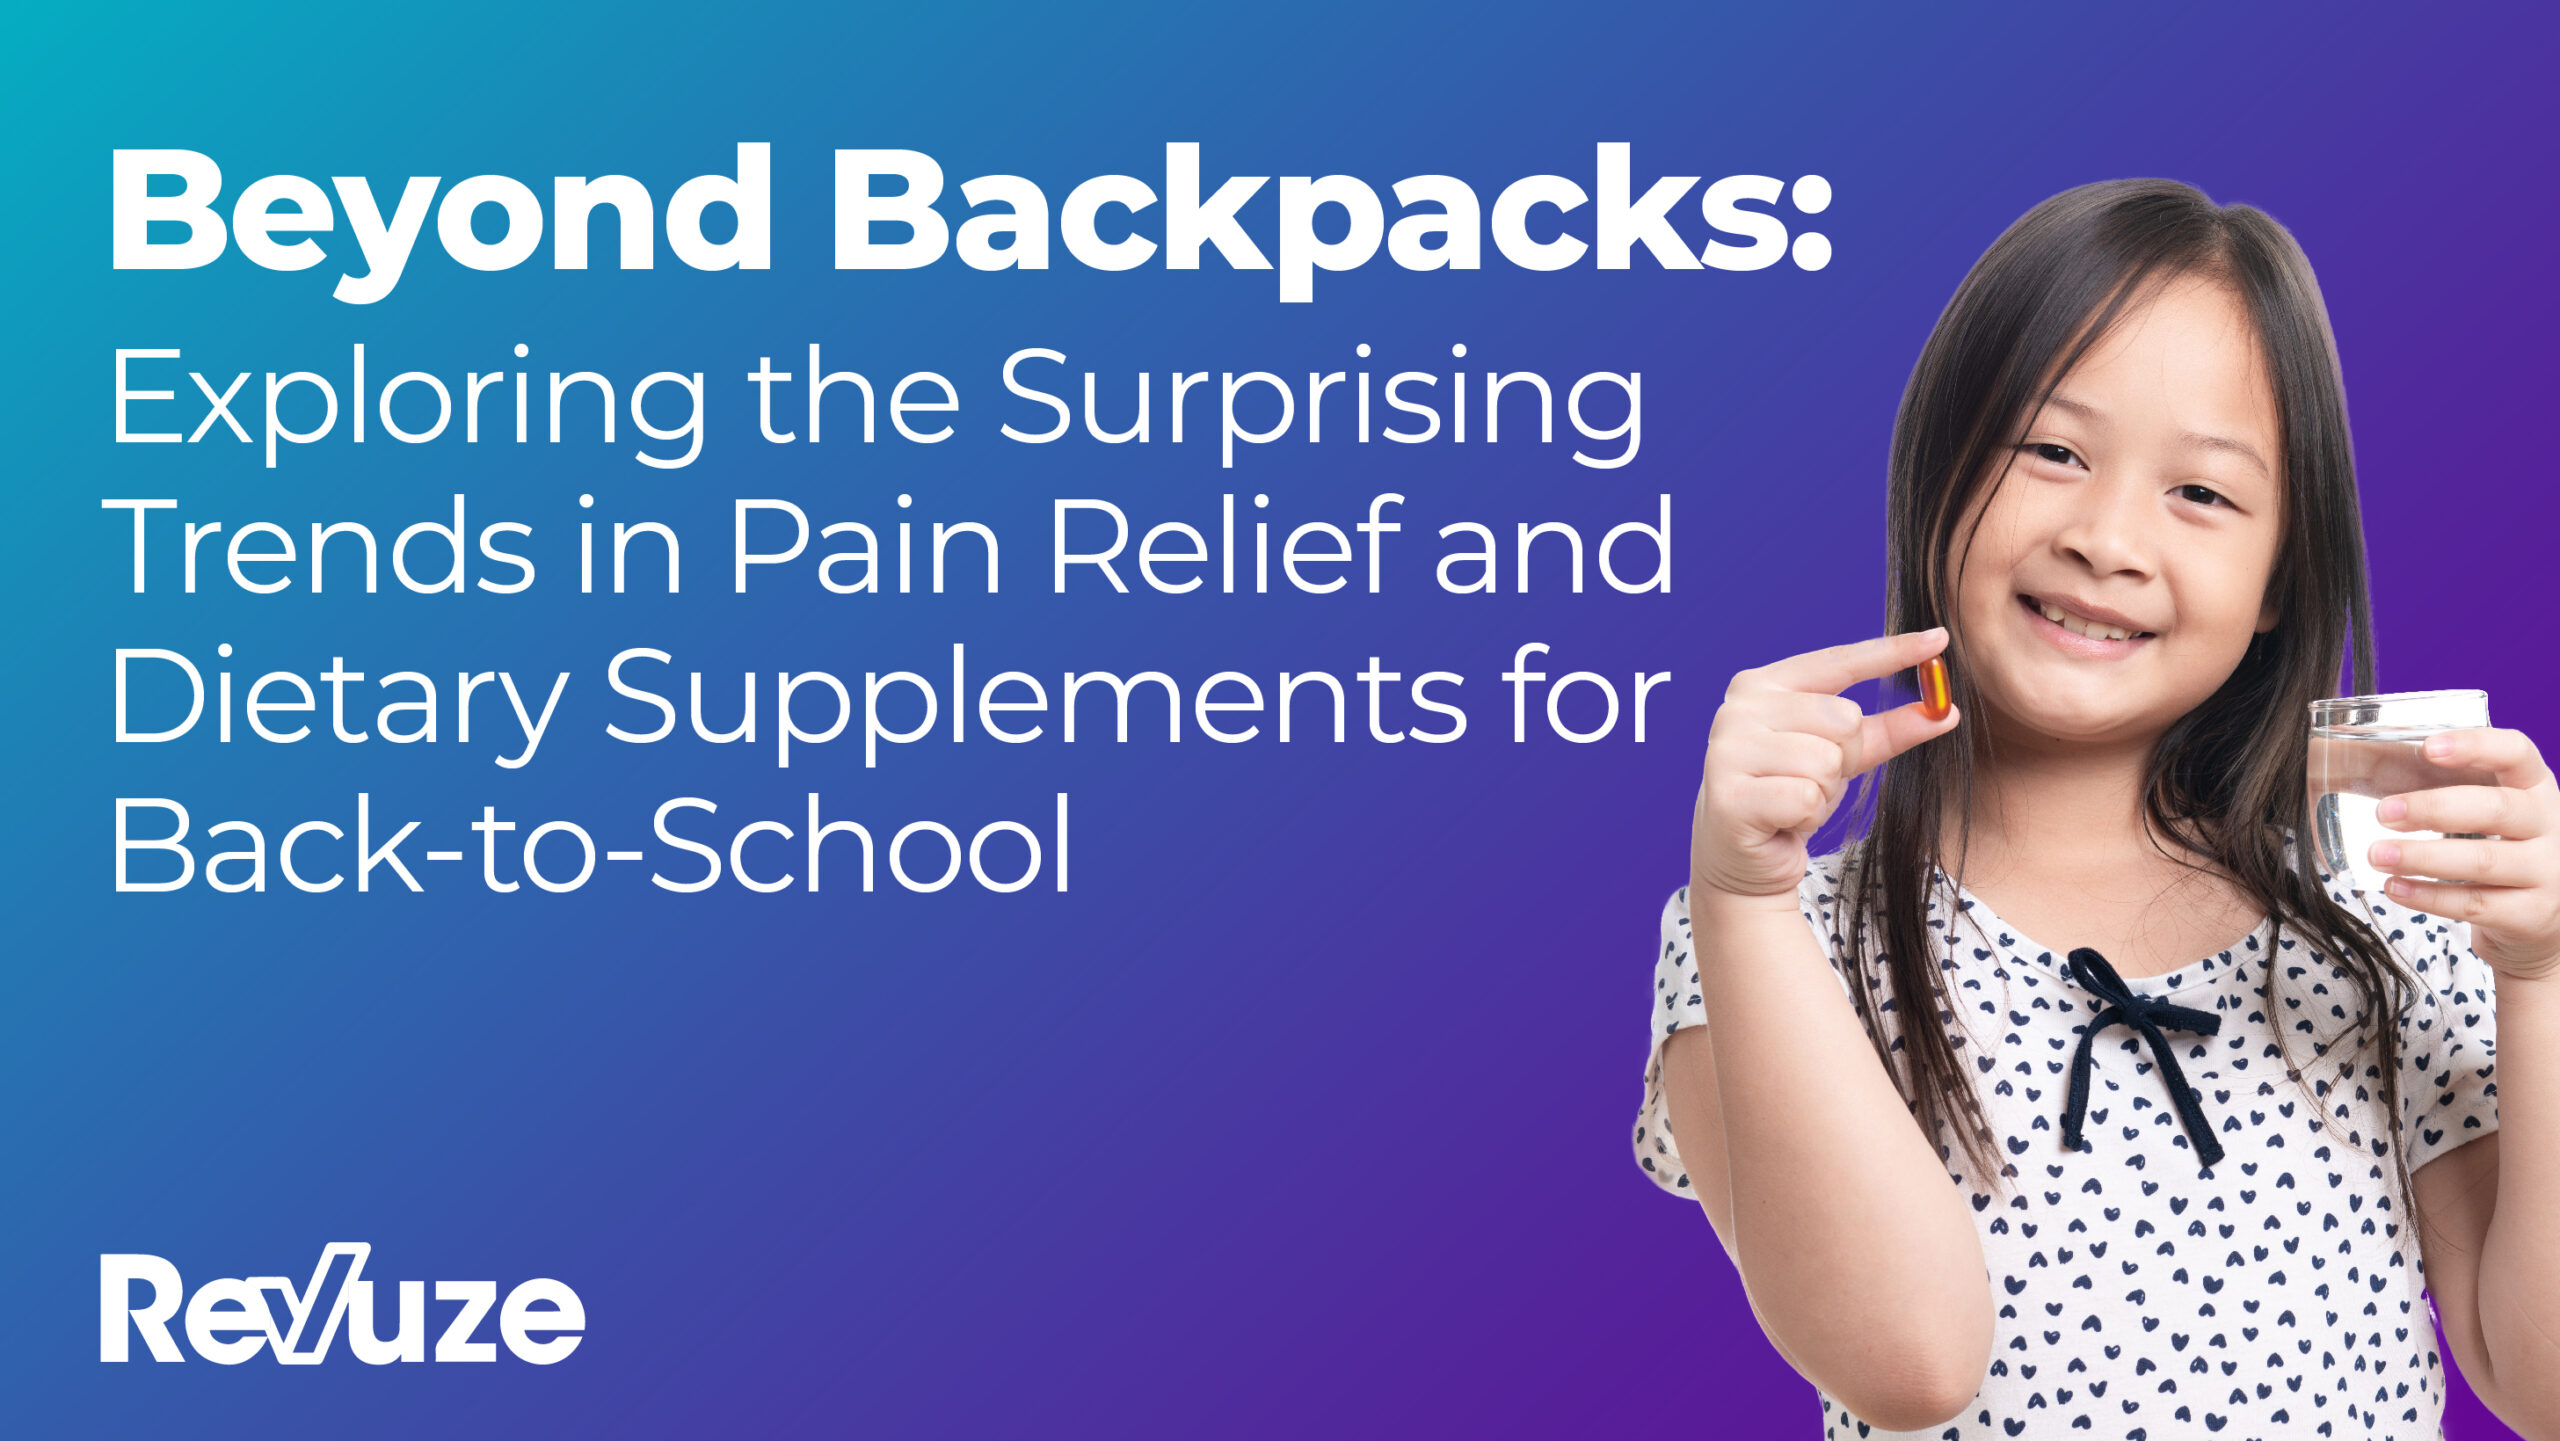 Beyond Backpacks: Exploring the Surprising Trends in Pain Relief and Dietary Supplements for Back-to-School